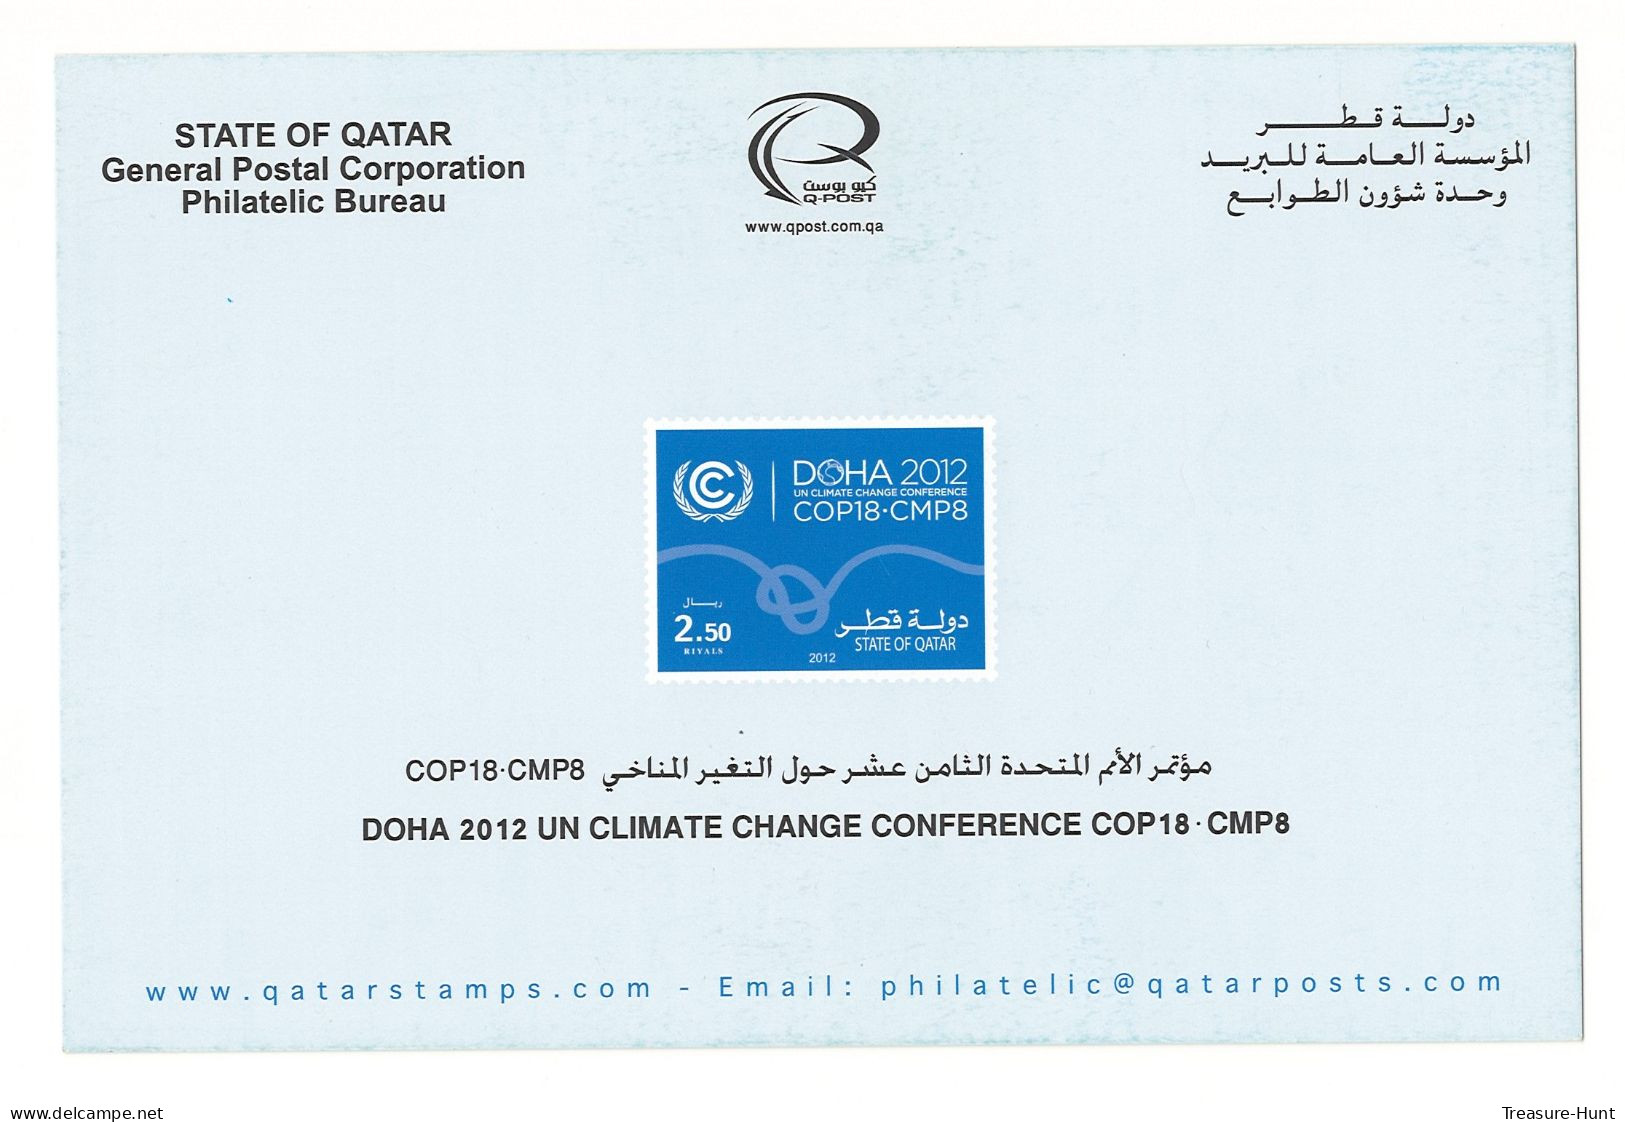 QATAR NEW STAMPS ISSUE BULLETIN / BROCHURE / POSTAL NOTICE - 2012 DOHA UN CLIMATE CHANGE CONFERENCE COP18.CMP8 - Qatar